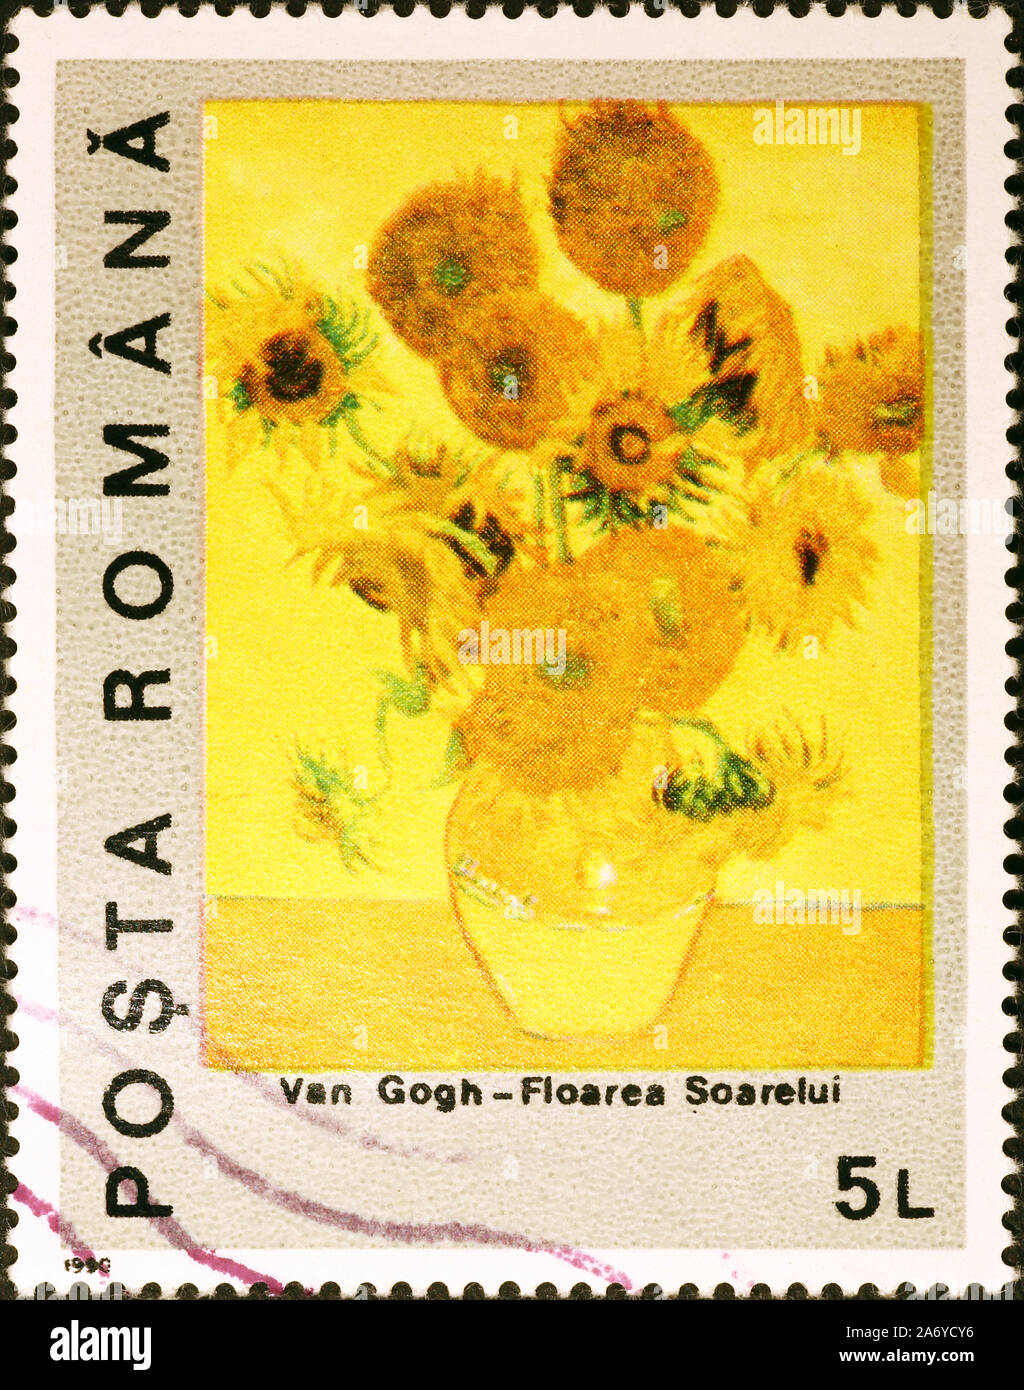 Flower pot by Van Gogh on postage stamp Stock Photo